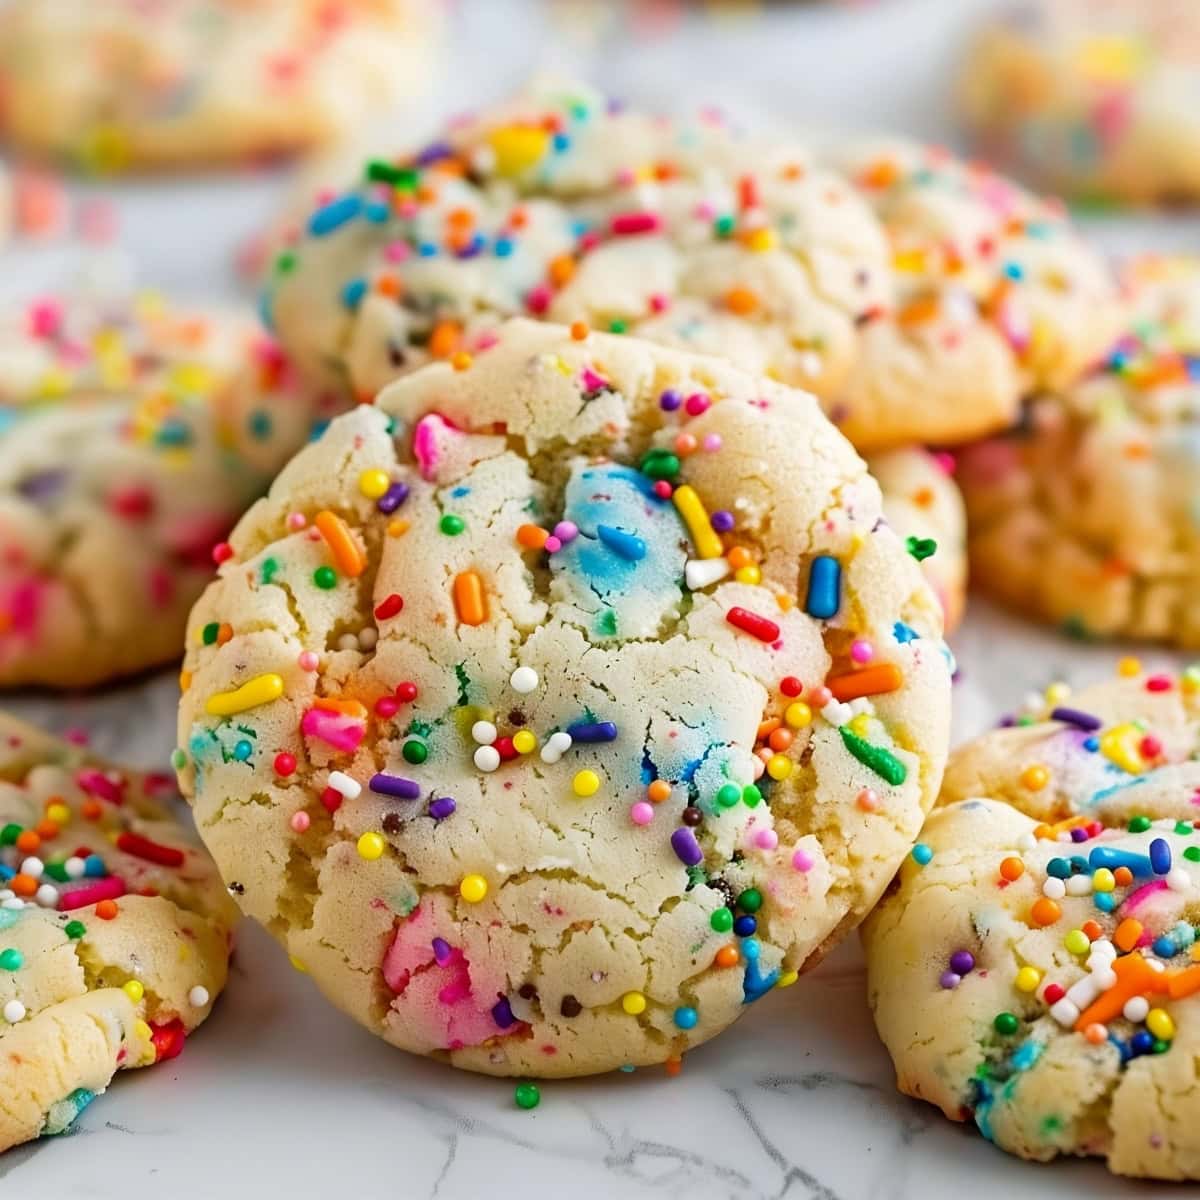 A close-up of Funfetti cake mix cookies with sprinkles scattered around them.